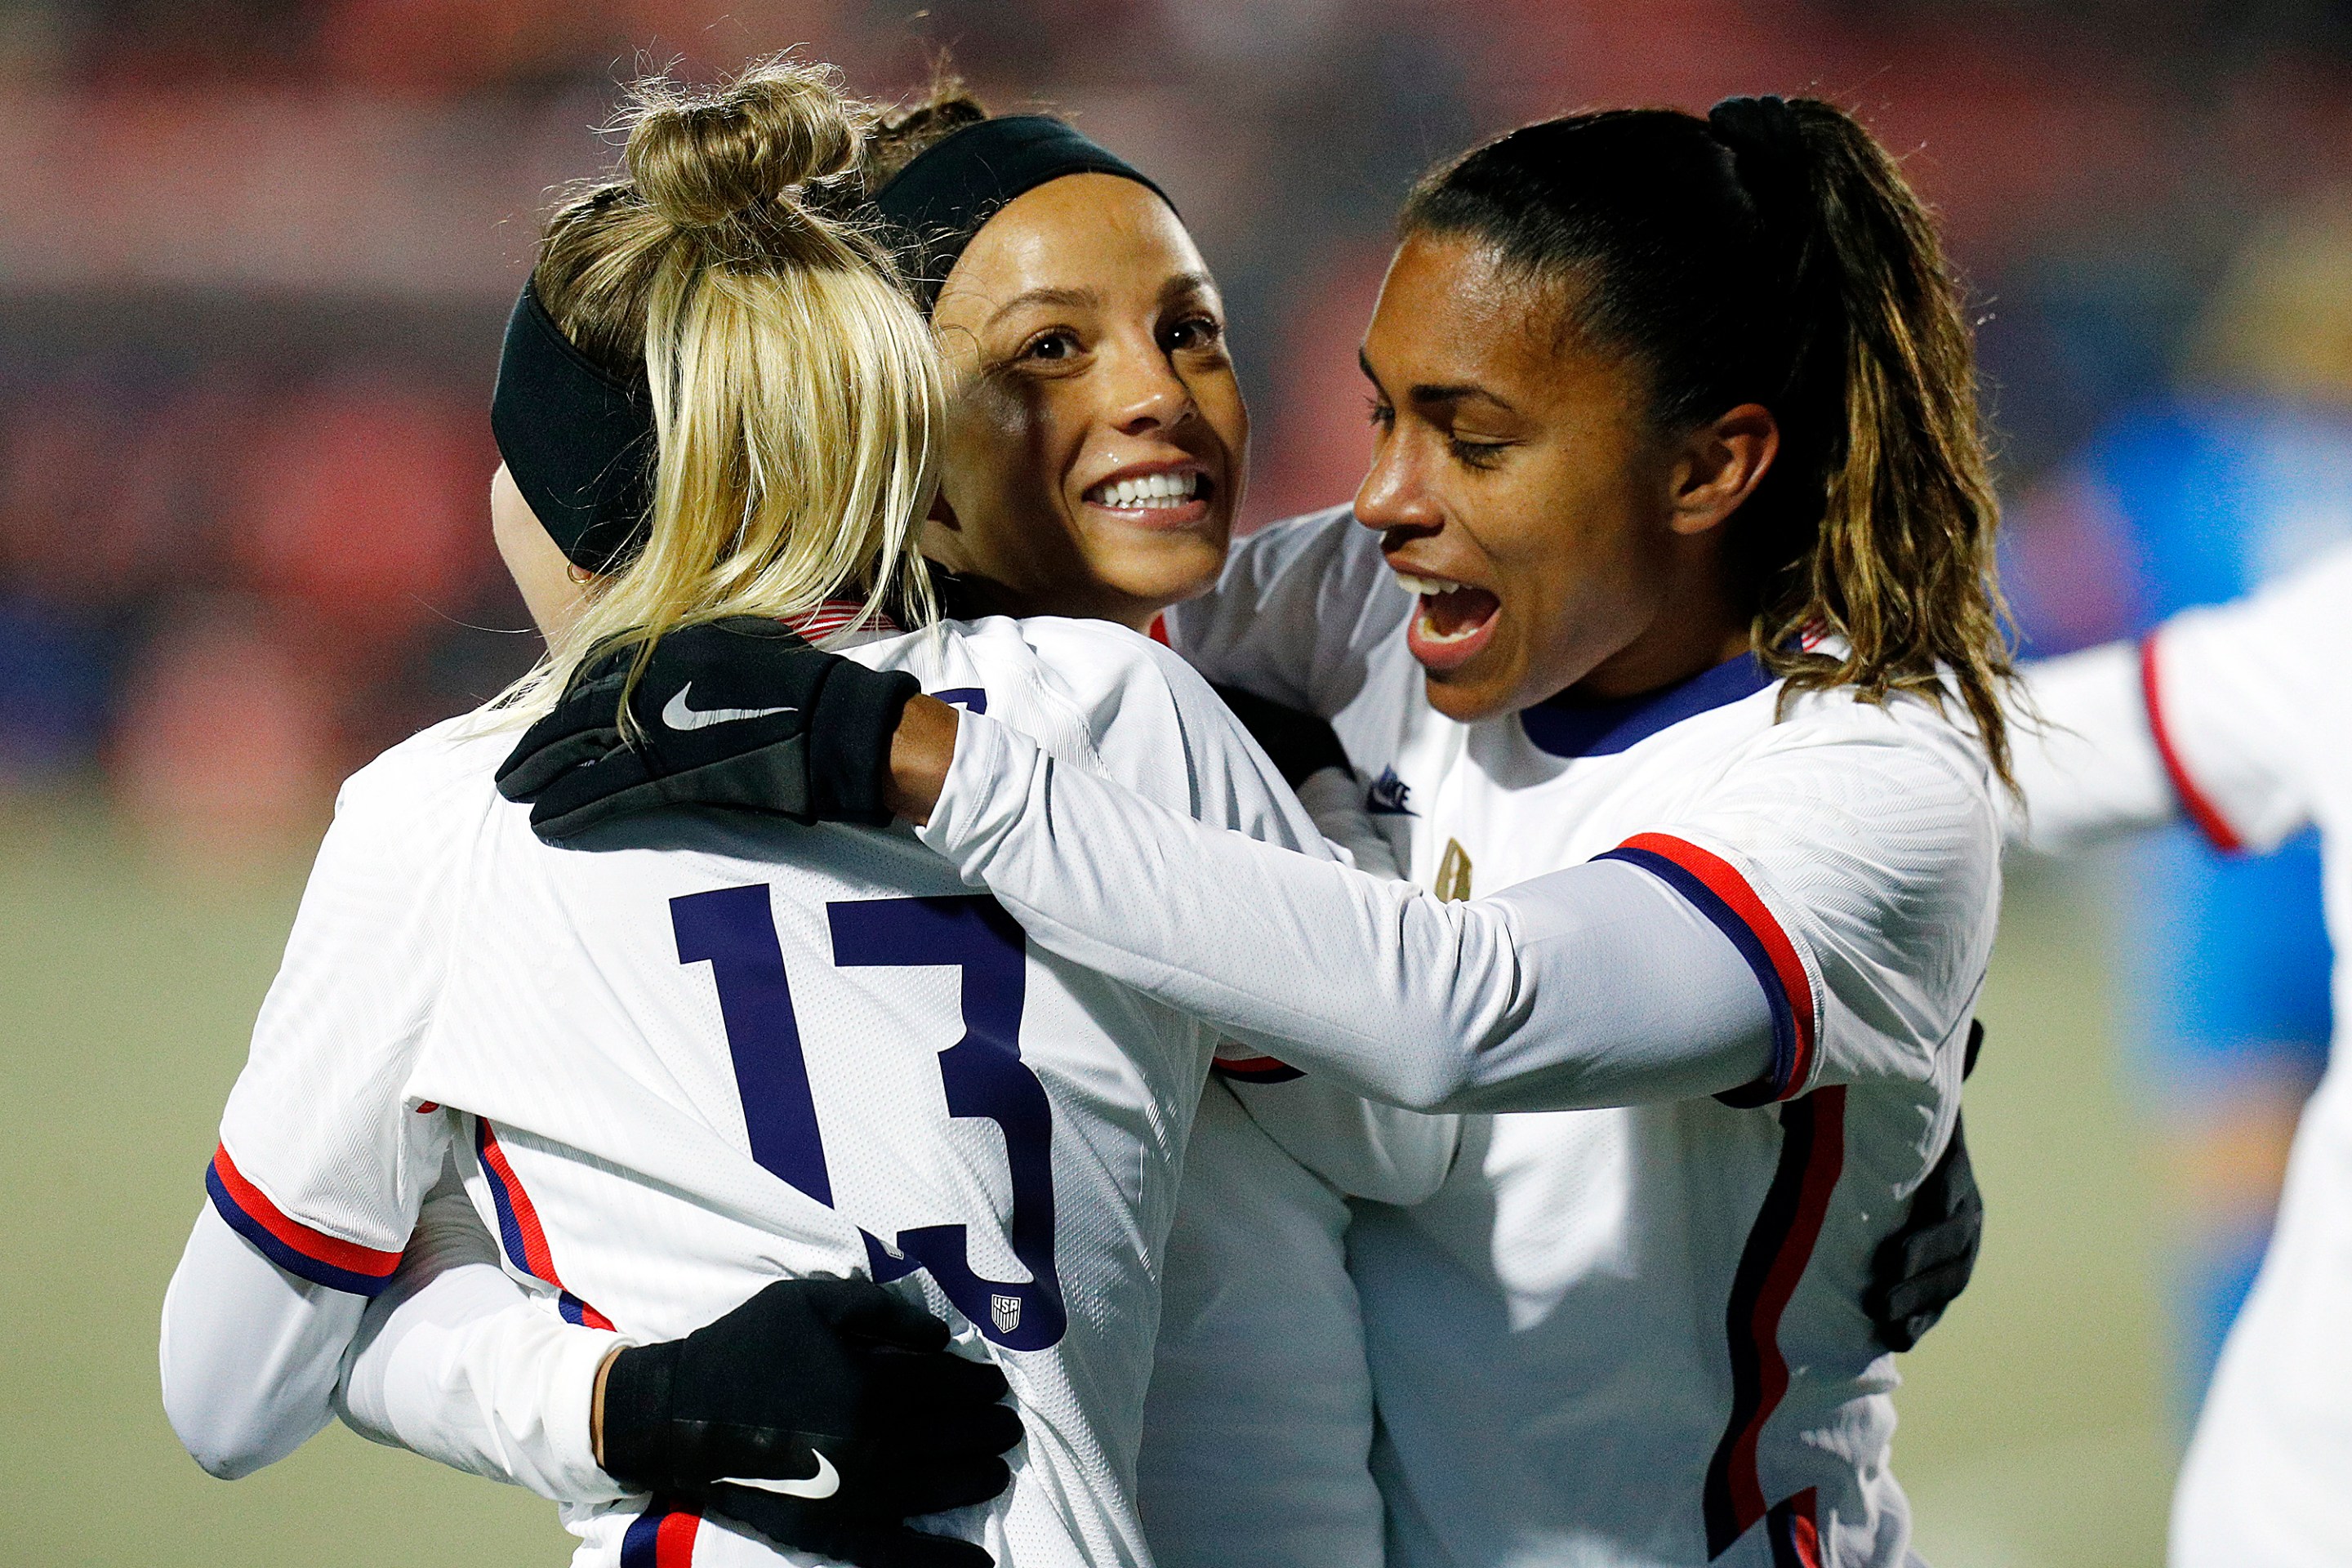 FRISCO, TEXAS - FEBRUARY 23: Mallory Pugh #9 of the USA celebrates with Ashley Sanchez #13 and Catarina Macario #20 after scoring against Iceland in the second half during the 2022 SheBelieves Cup at Toyota Stadium on February 23, 2022 in Frisco, Texas.